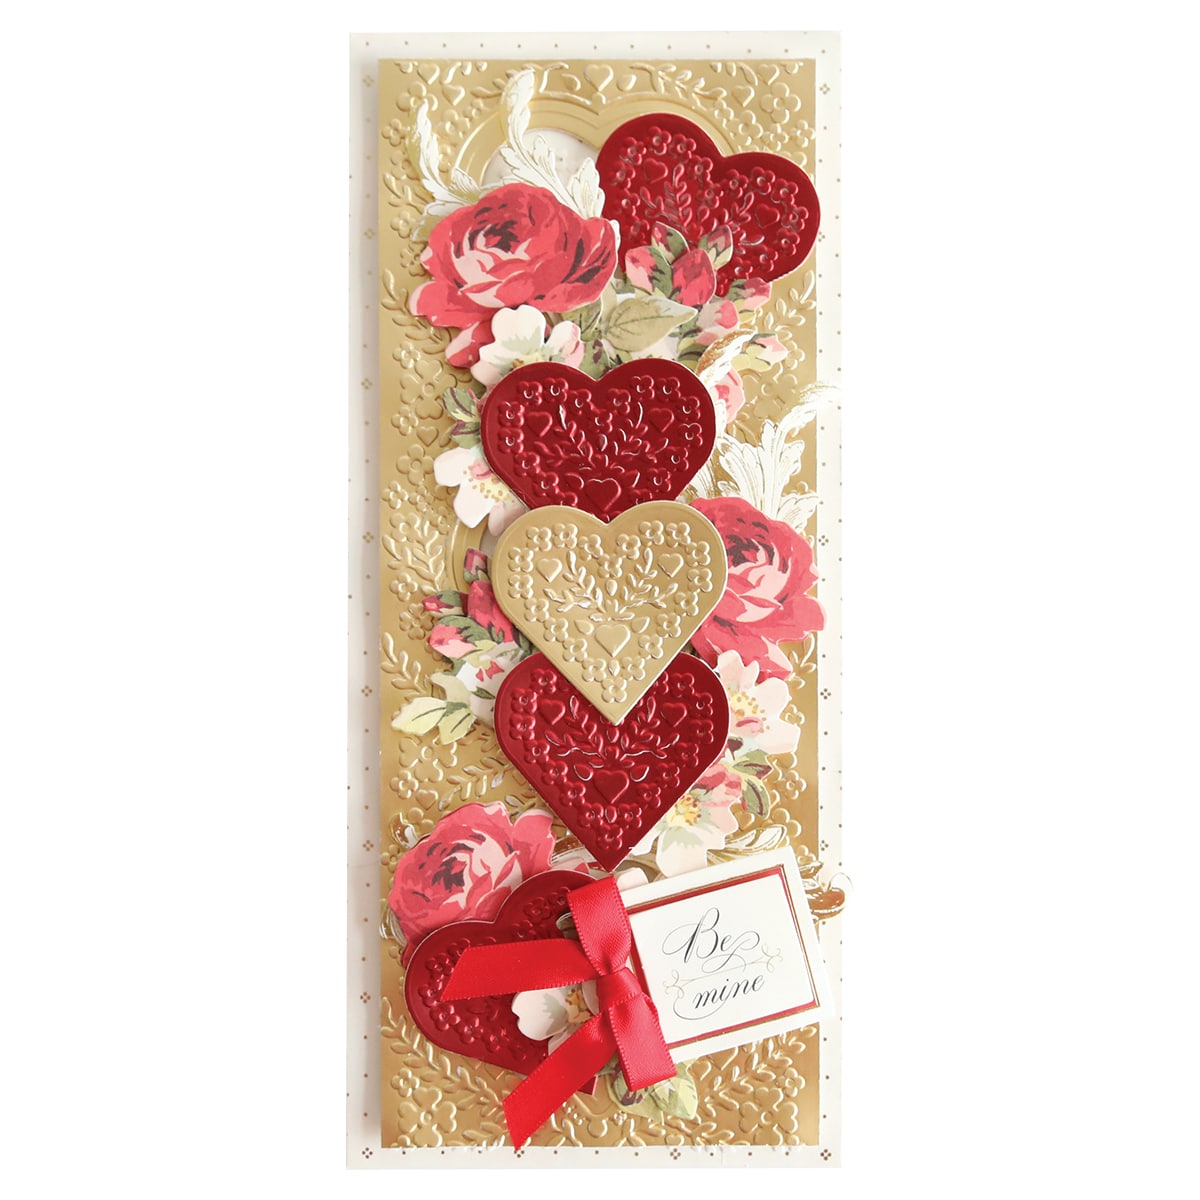 a valentine's day card with hearts and flowers.